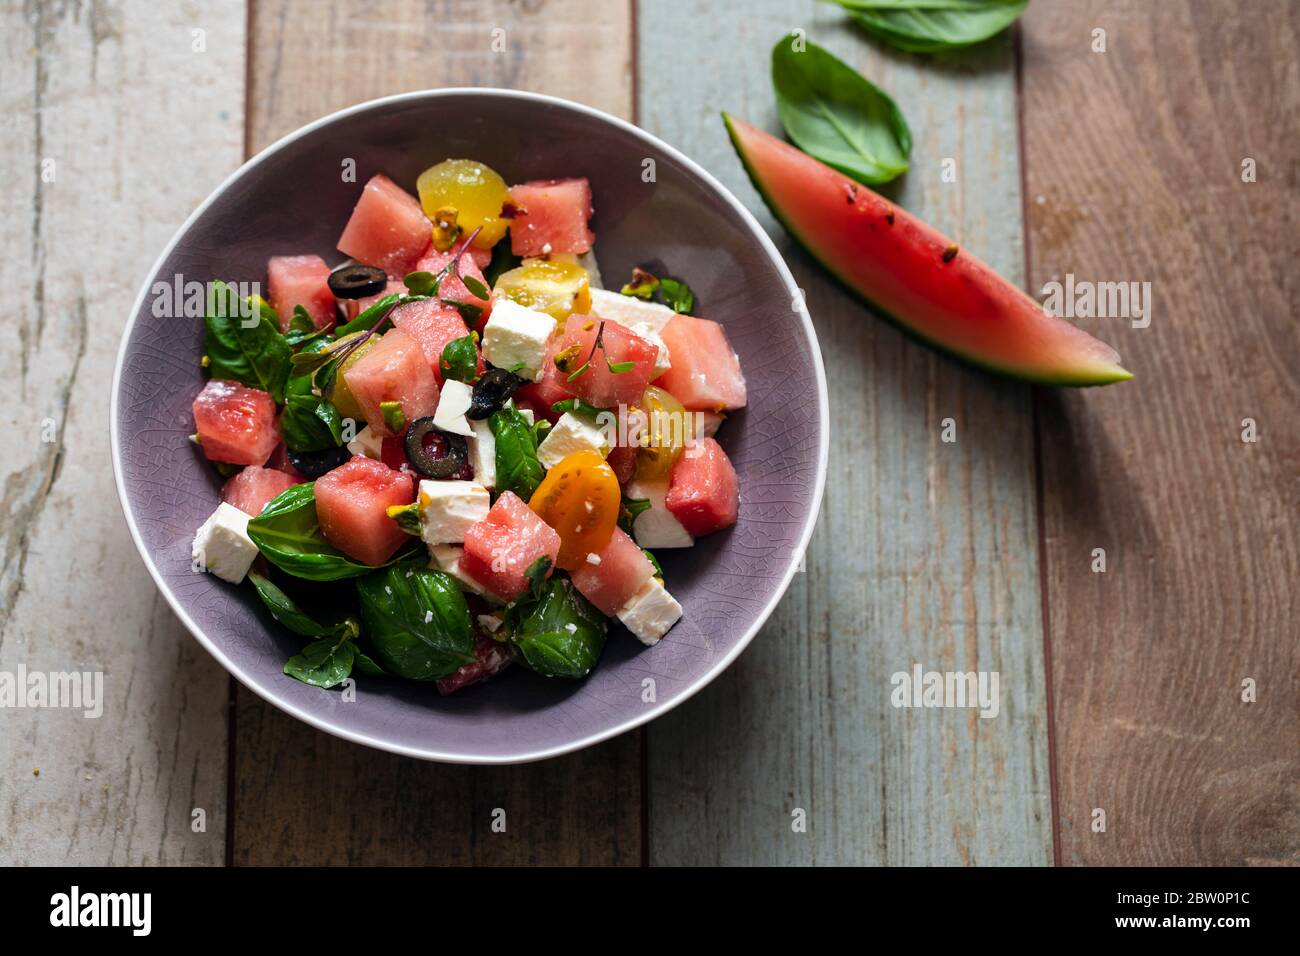 Summer salad with watermelon, tomatoes, feta cheese and basil Stock Photo